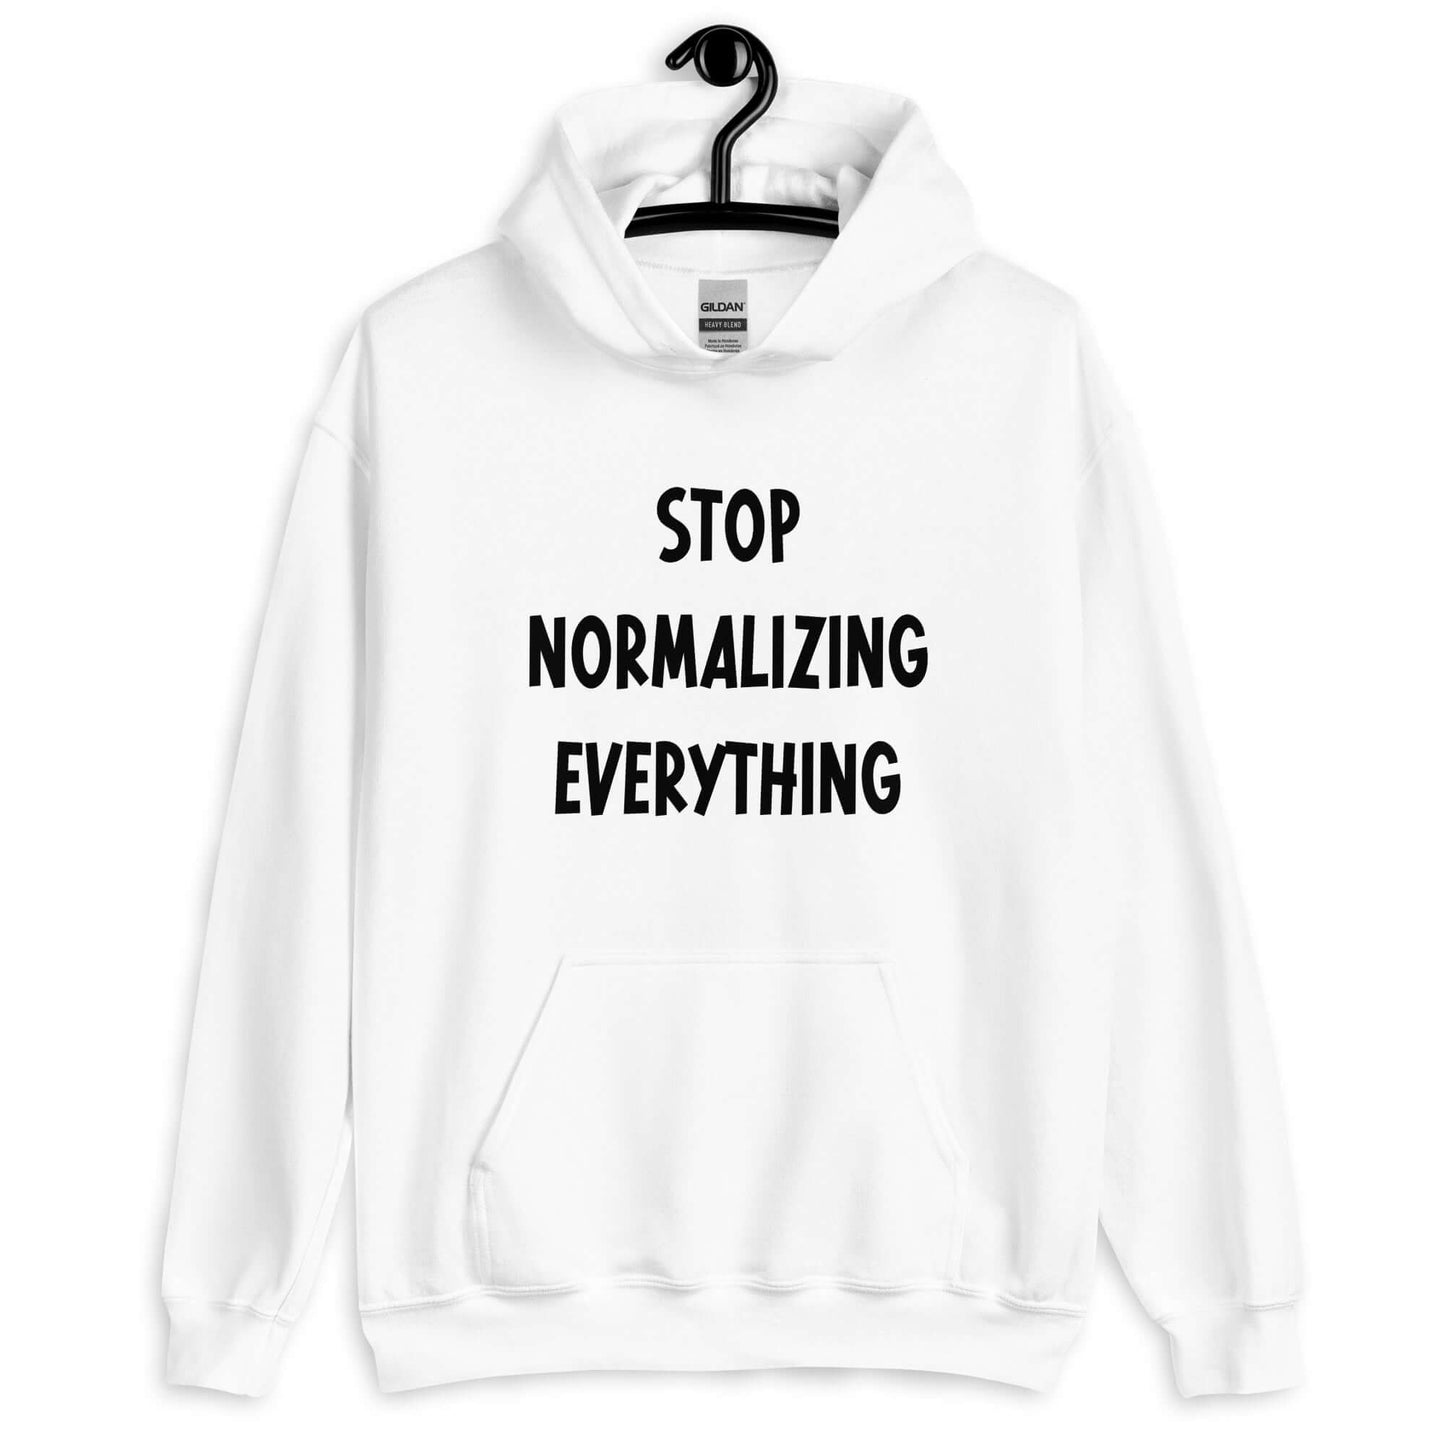 Stop normalizing everything hoodie